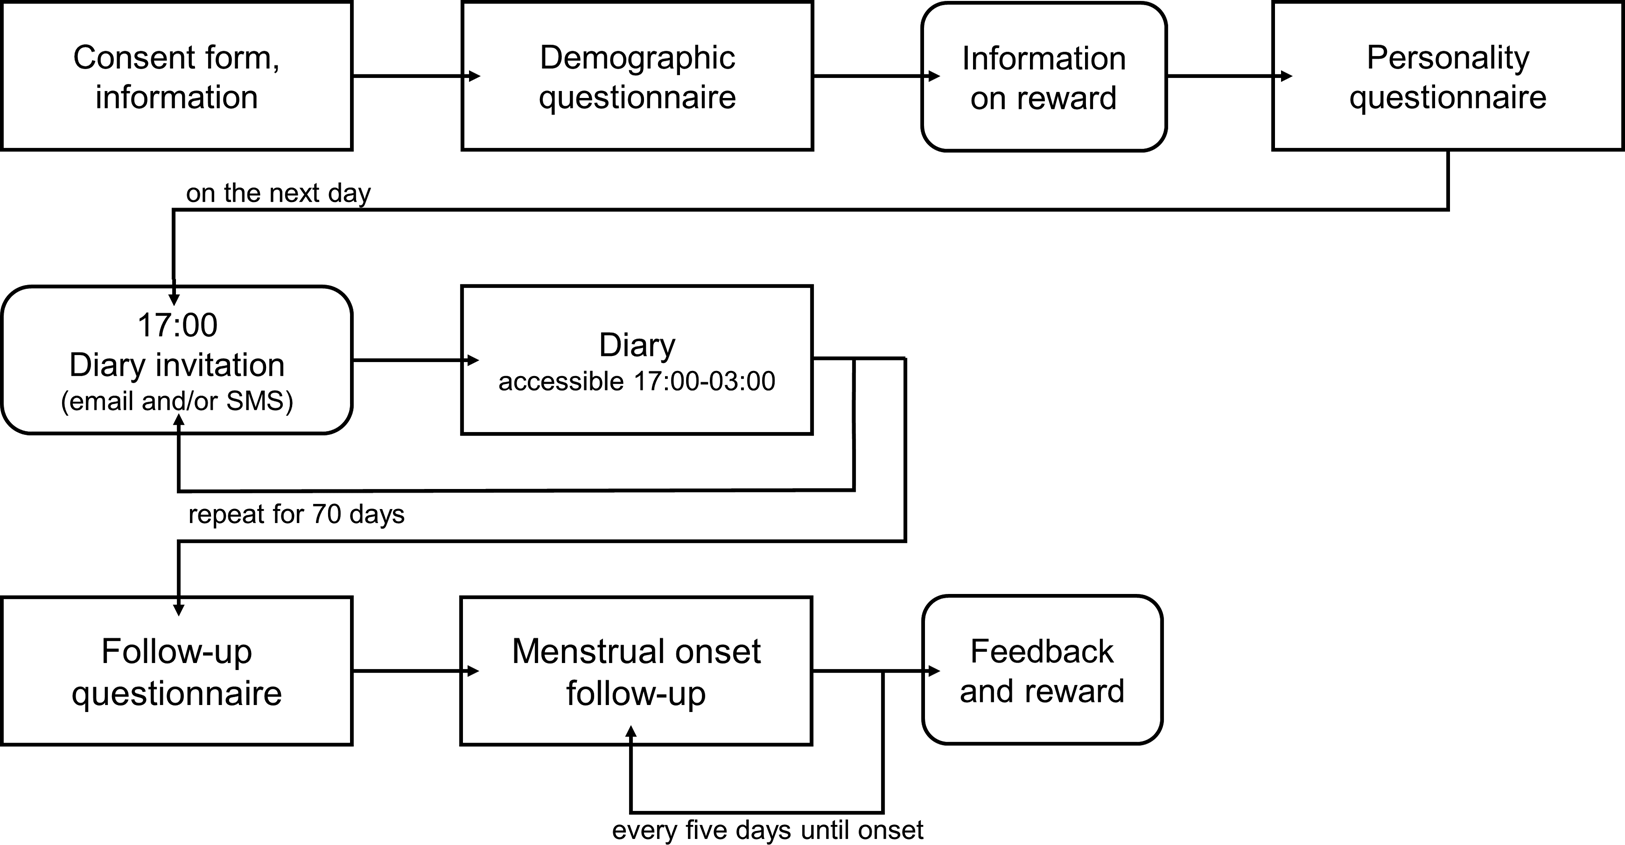 Women feel more attractive before ovulation: evidence from a large-scale  online diary study, Evolutionary Human Sciences